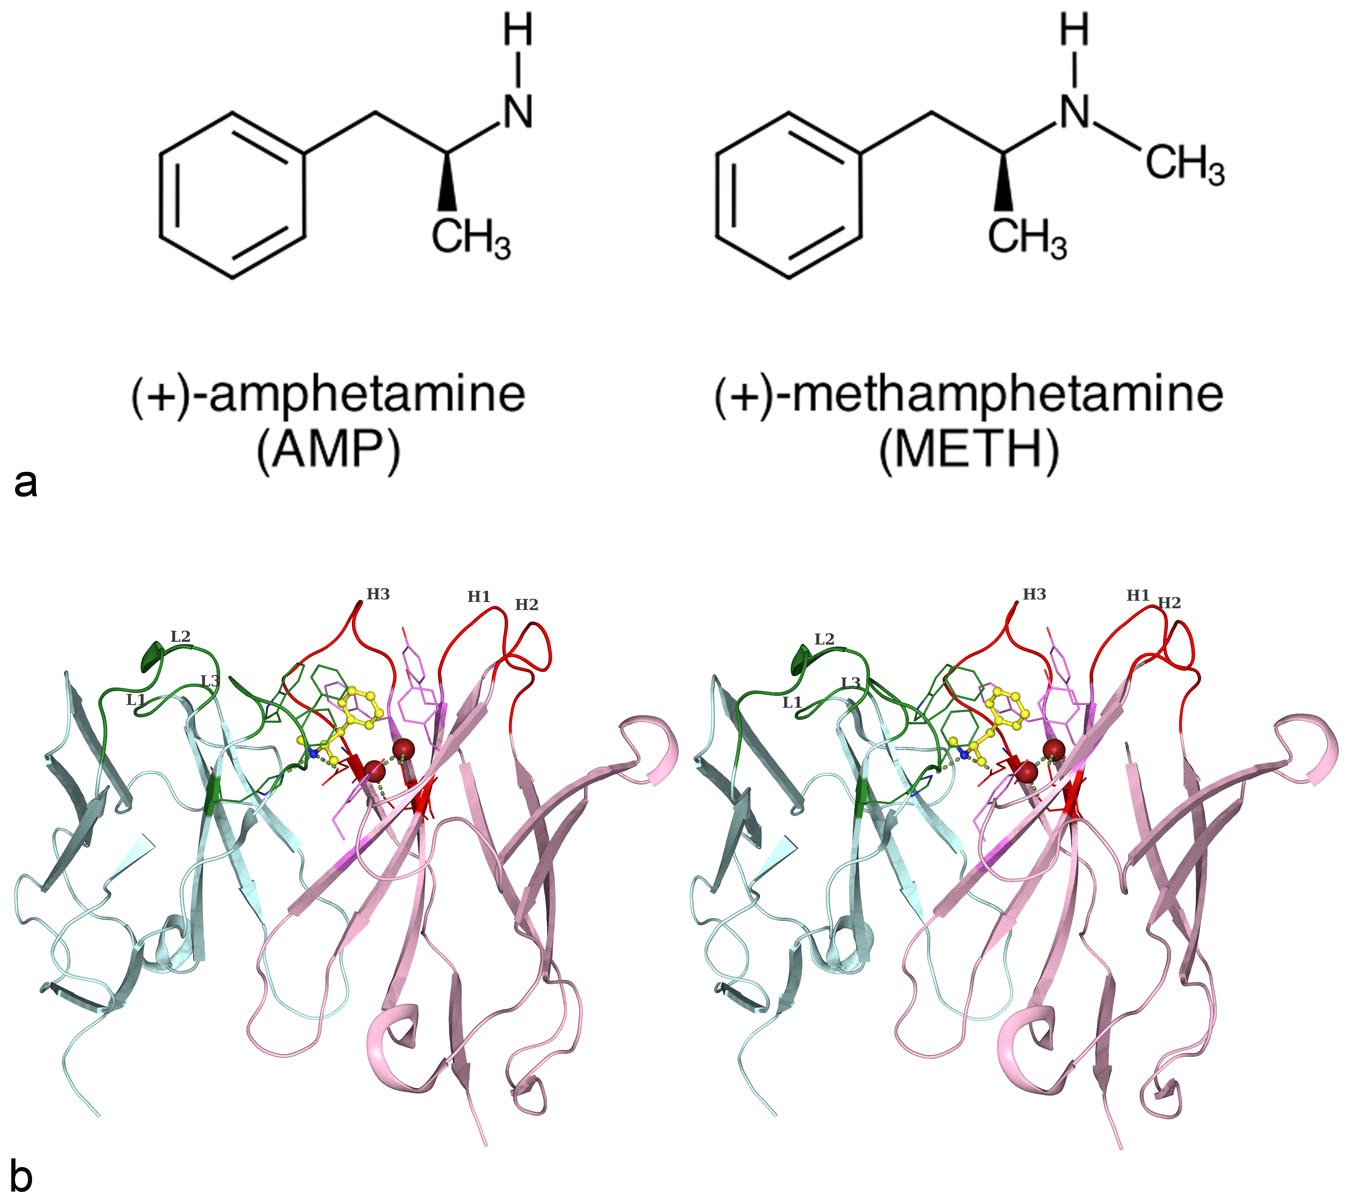 Affinity improvement of a therapeutic antibody to methamphetamine and amphetamine through structure-based antibody engineering Scientific Reports